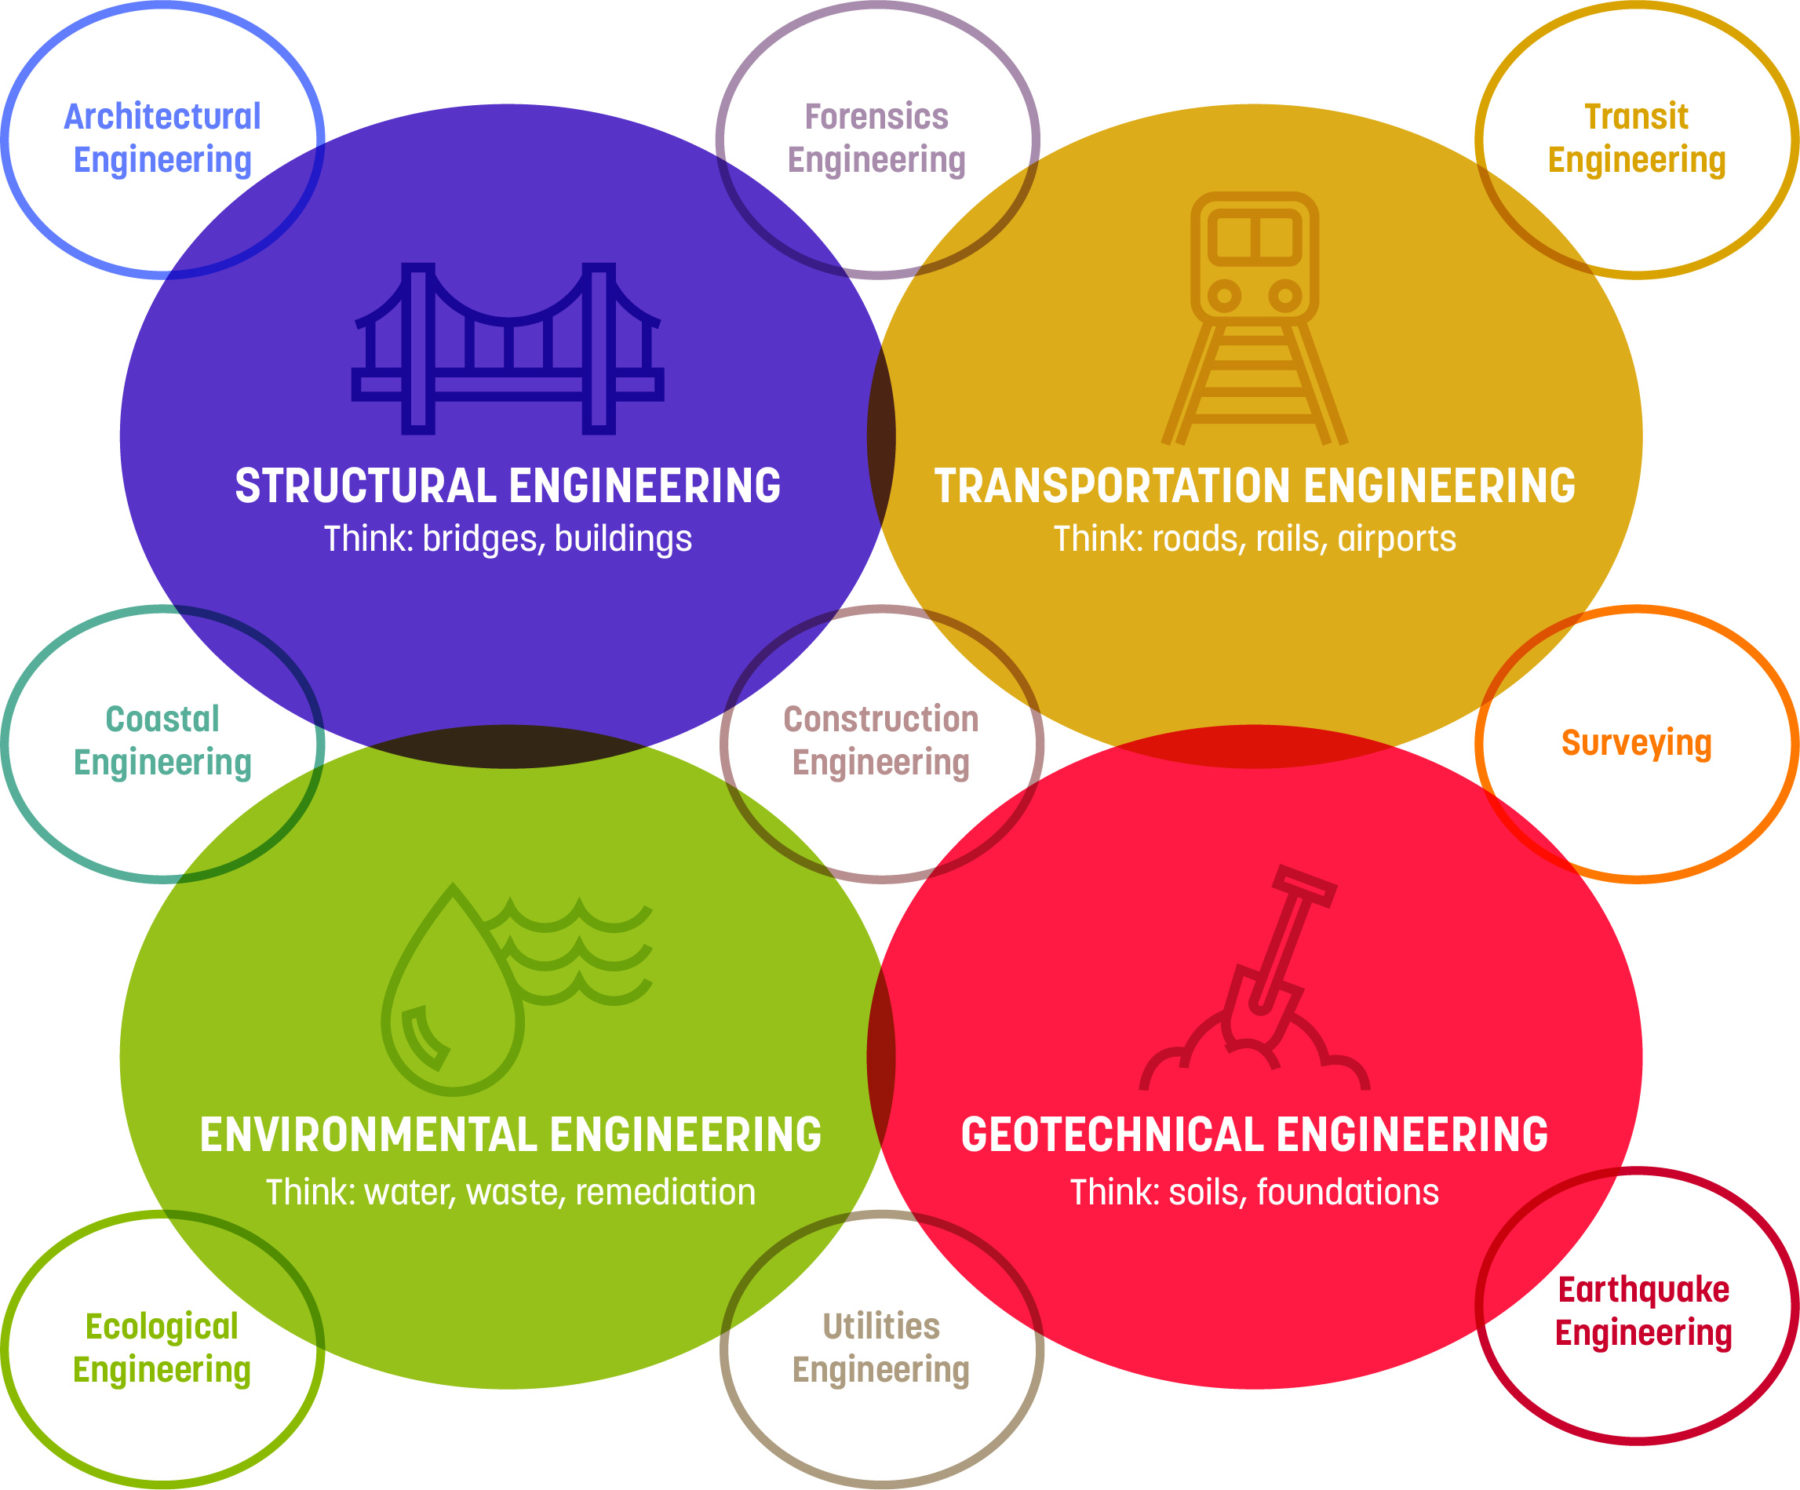 Diagram showing the difference between structural engineering, transportation engineering, environmental engineering, and geotechnical engineering